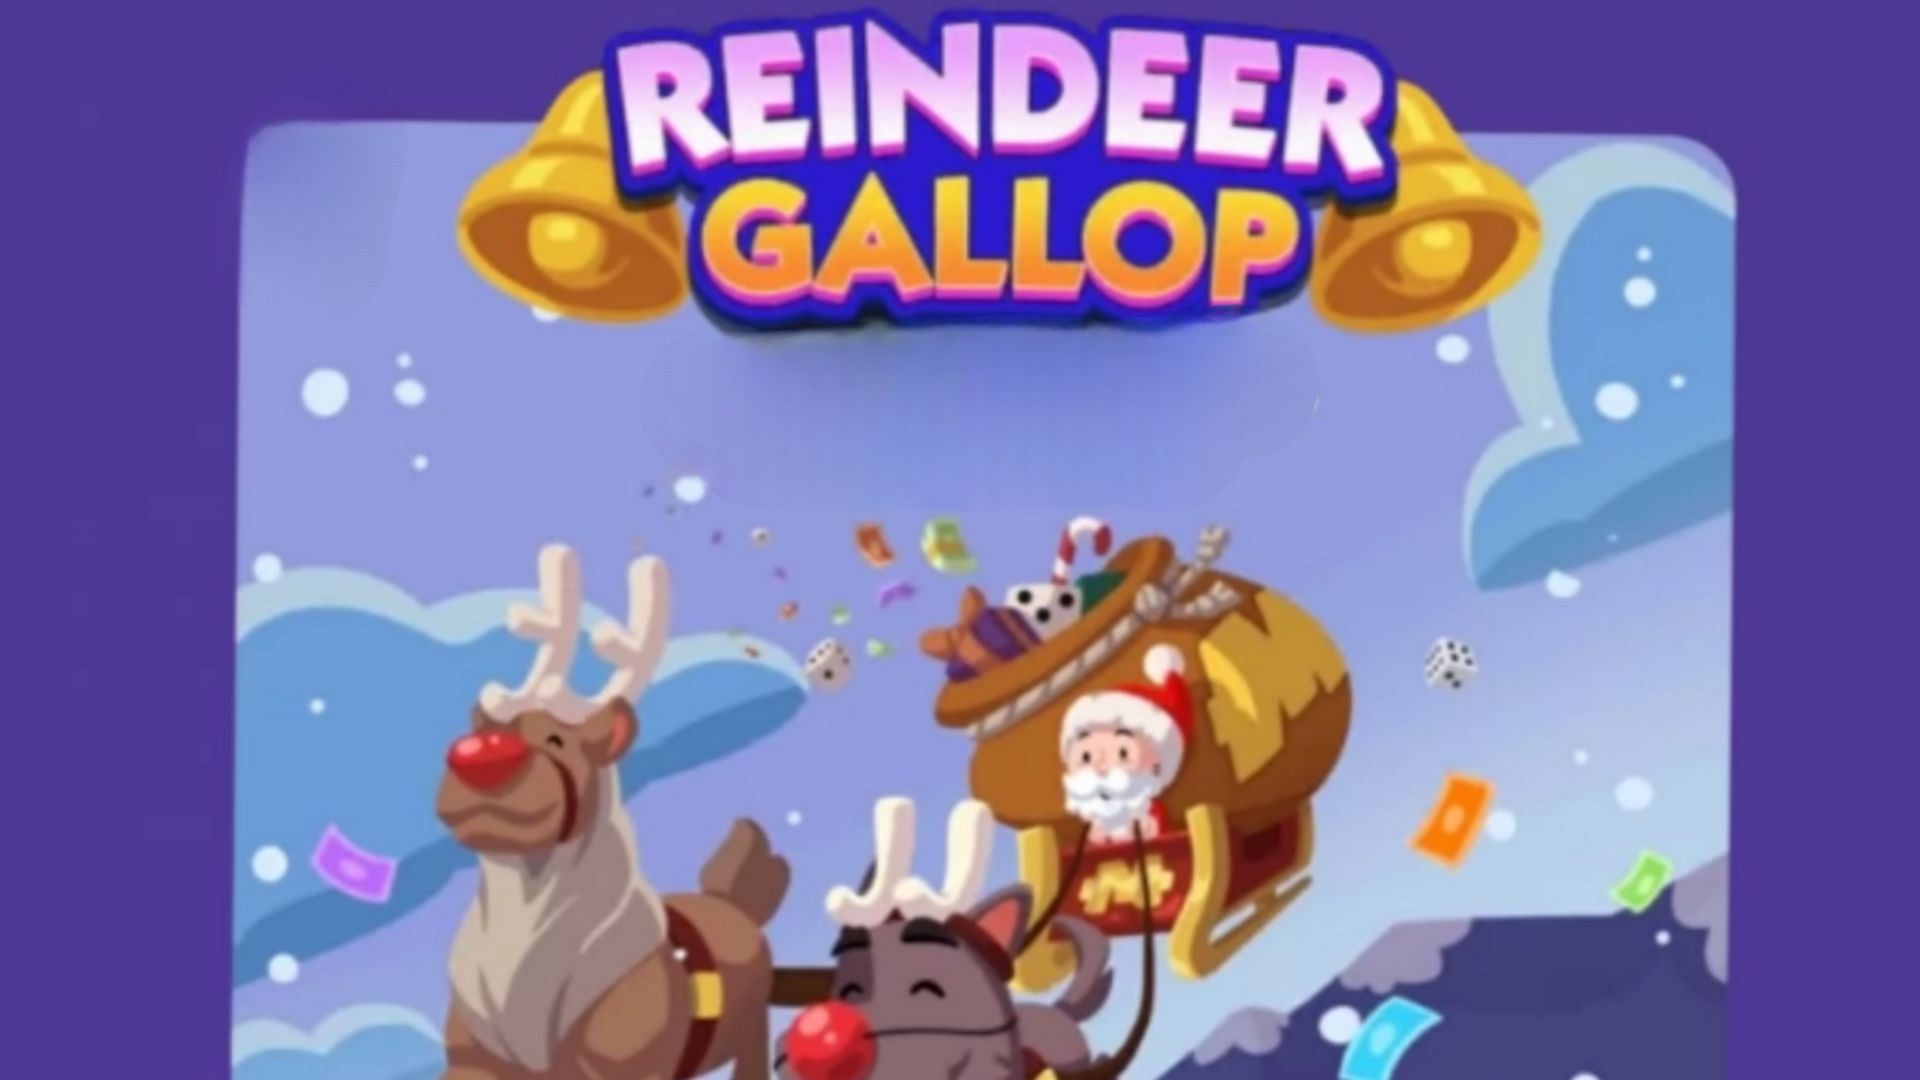 Reindeer Gallop tournament is now live in Monopoly Go (Image via Scopely) 